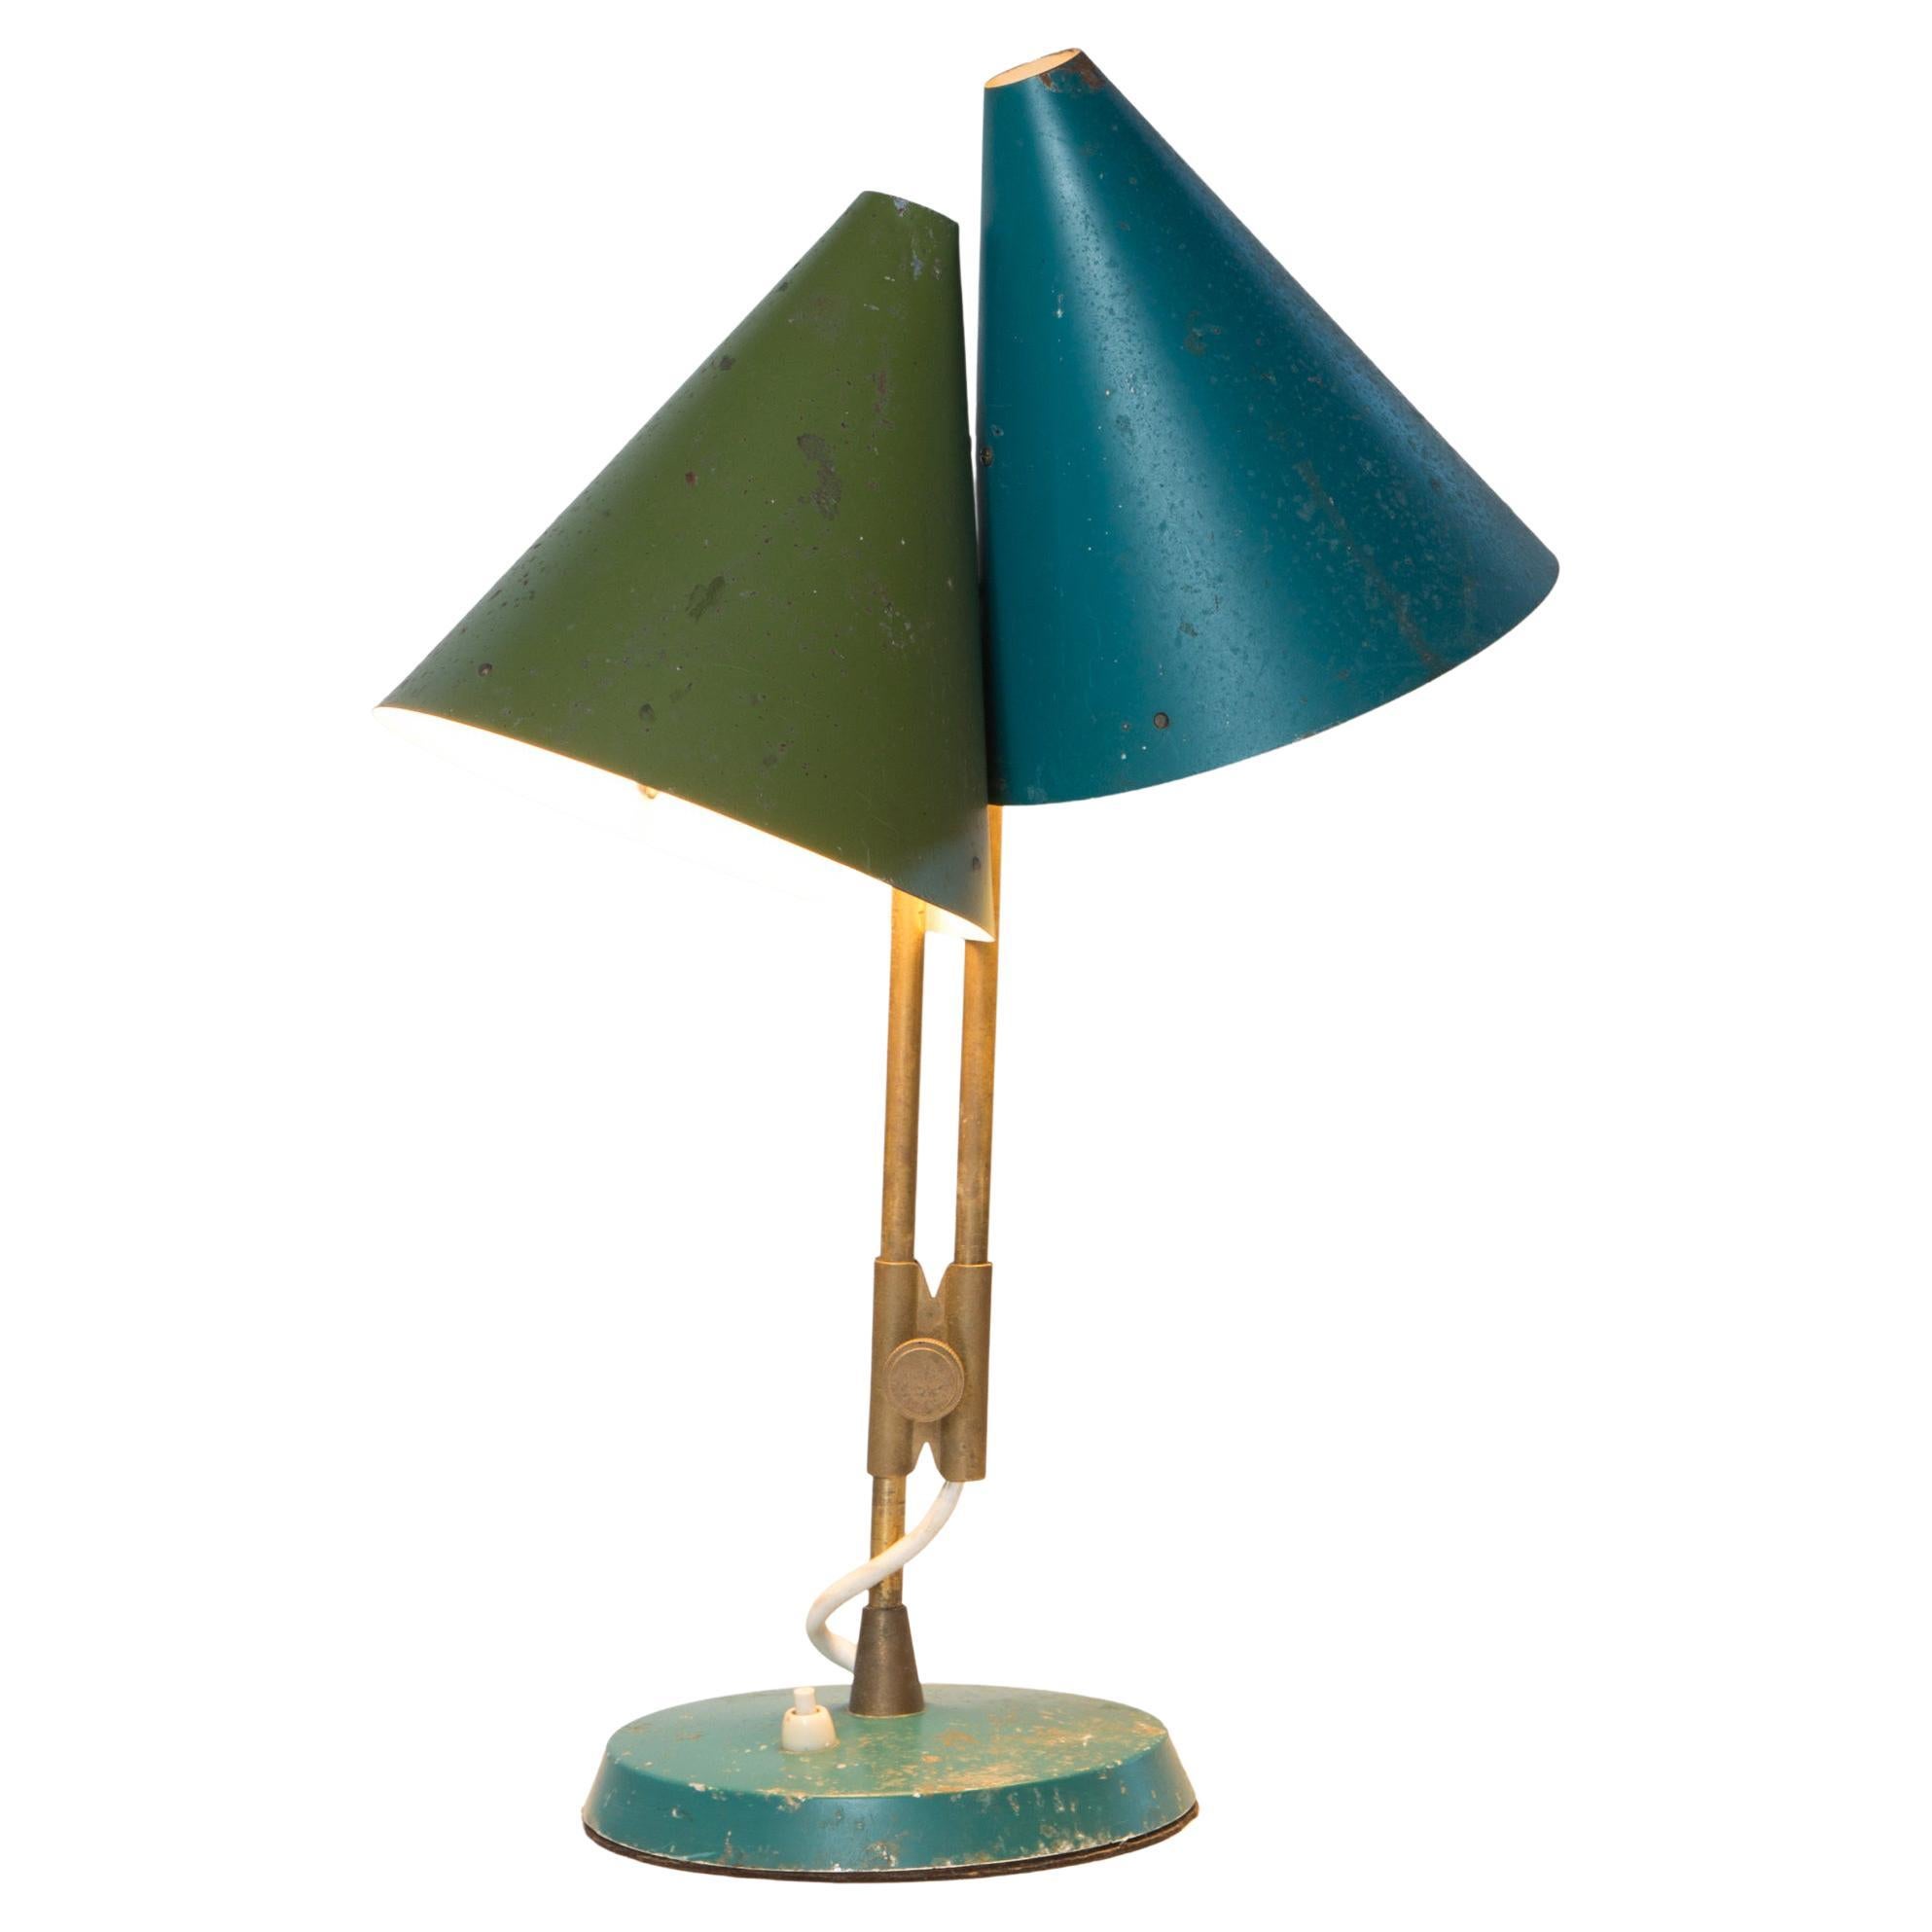 1959 Bent Karlby 'Mosaik' adjustable brass & lacquered metal table lamp for Lyfa. A wonderfully patinated table lamp executed in two shades of green lacquered metal with adjustable brass arms that raise and lower with a knob to set position. This